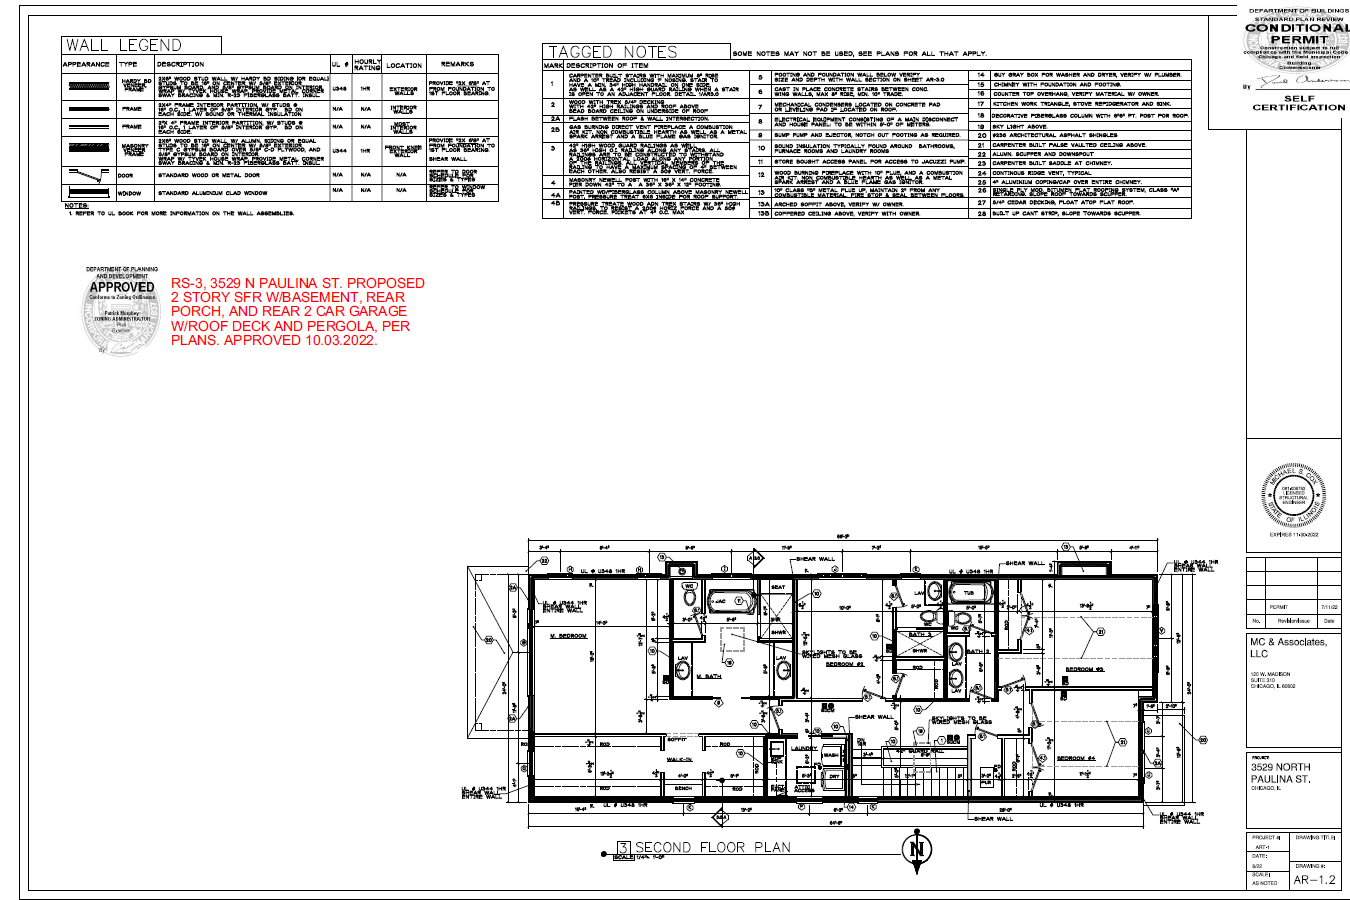 Property Drawing